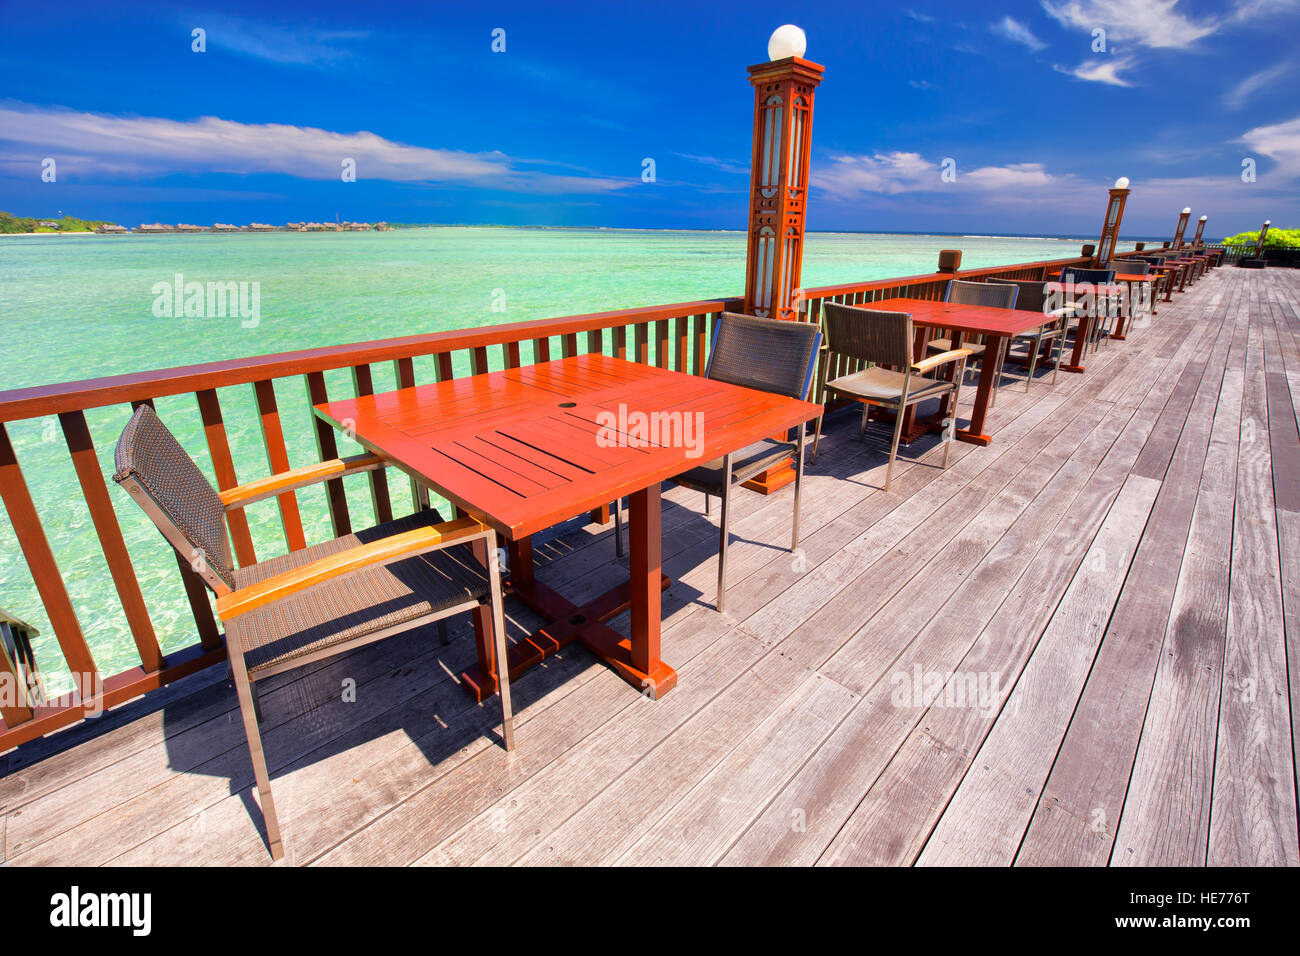 Chairs and tables with palm trees, water bungalows and clear water on luxurious beach resort. Stock Photo